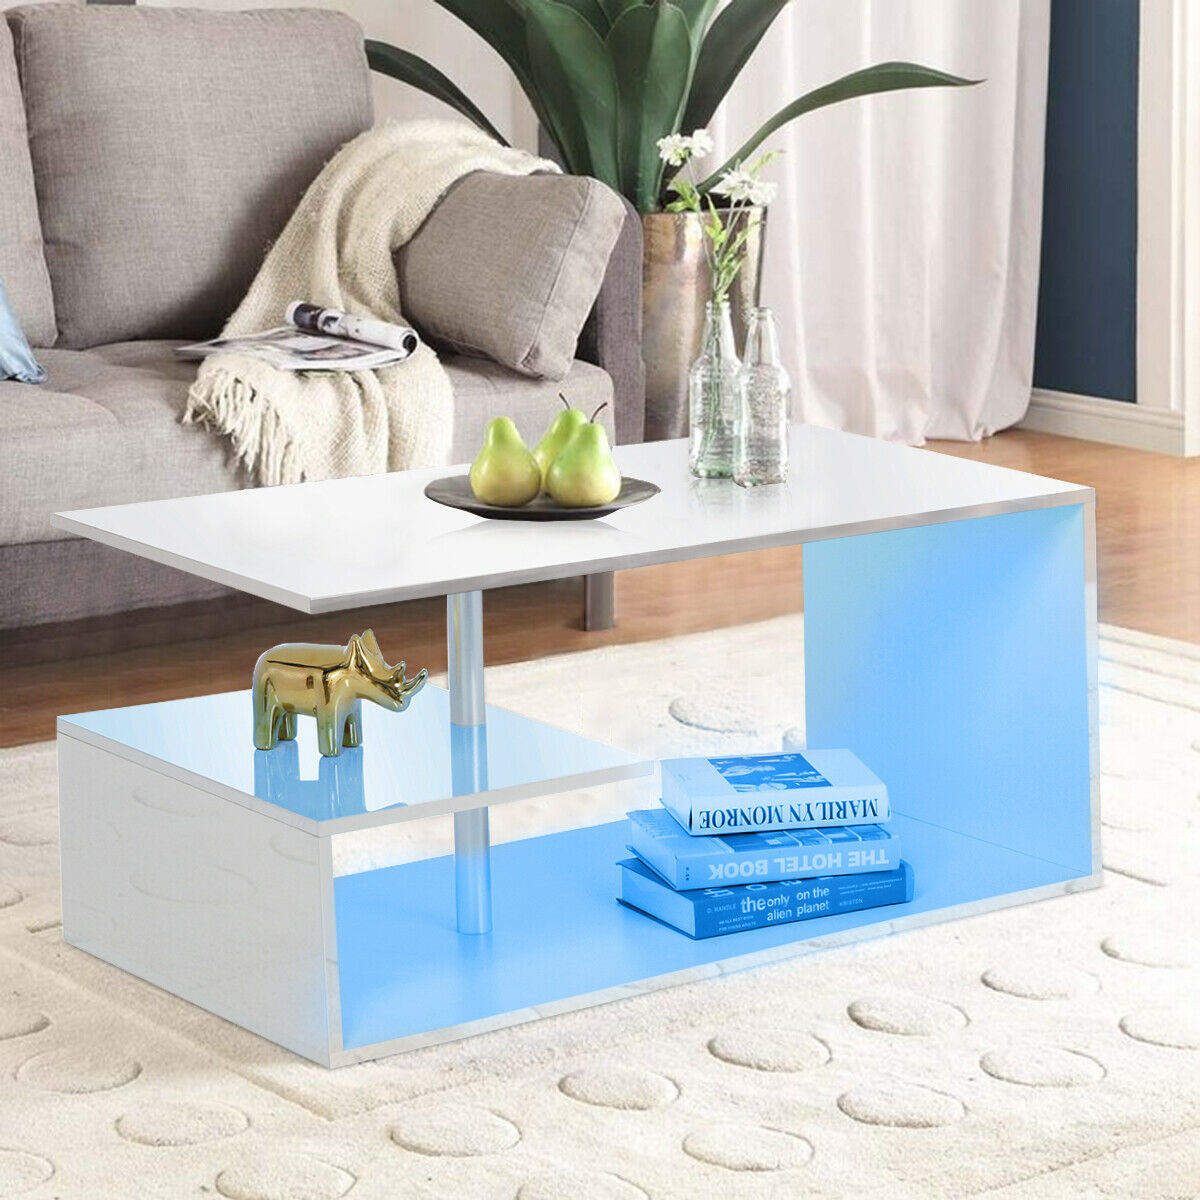 Enhance Your Living Room With This Stylish High Gloss Modern Coffee Table 60944d1acac1d 